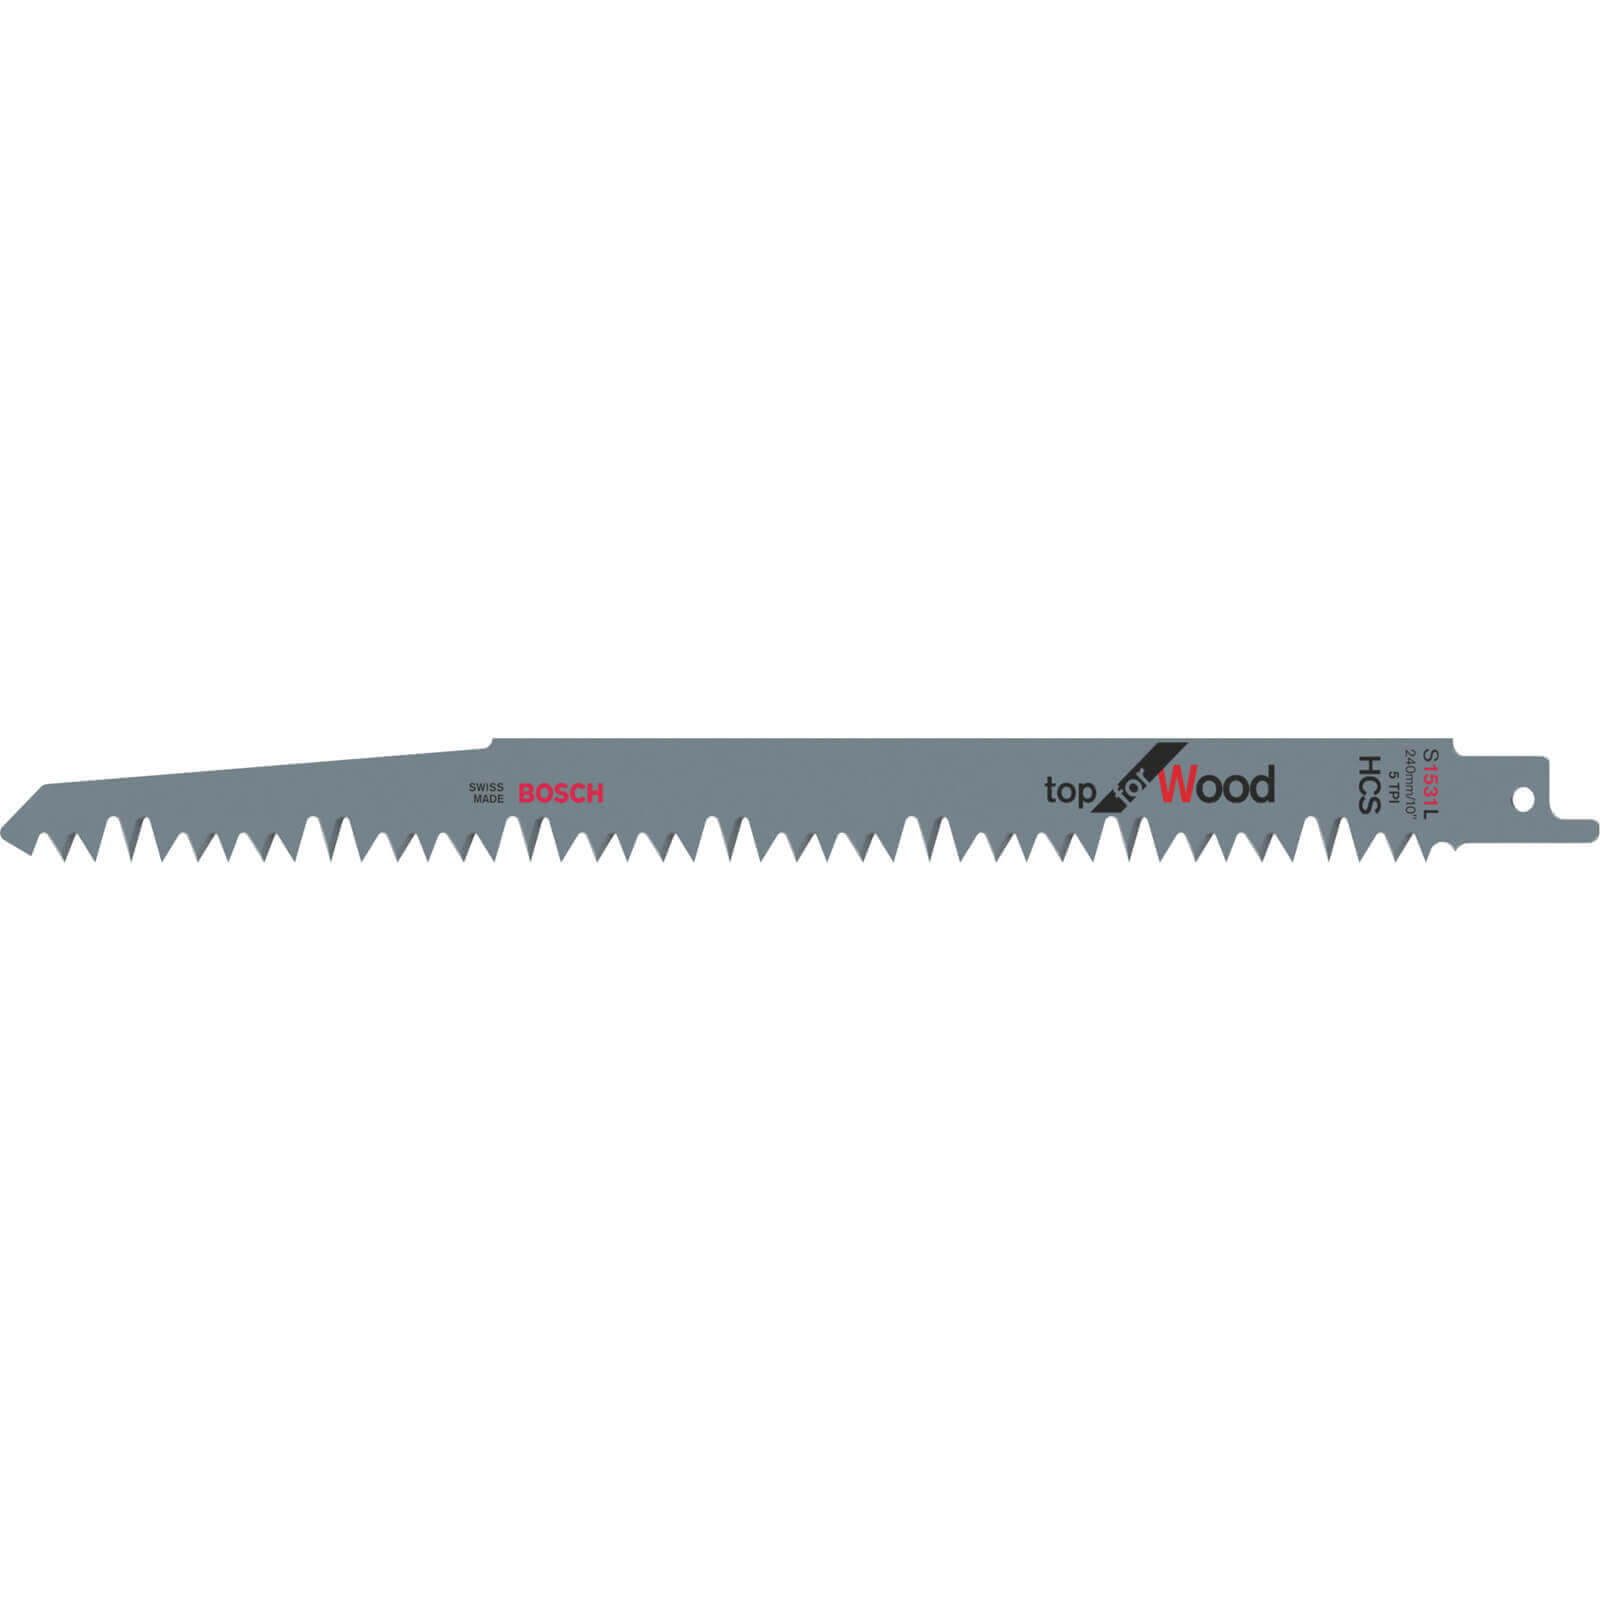 Photo of Bosch S1531l Reciprocating Saw Blades Pack Of 5